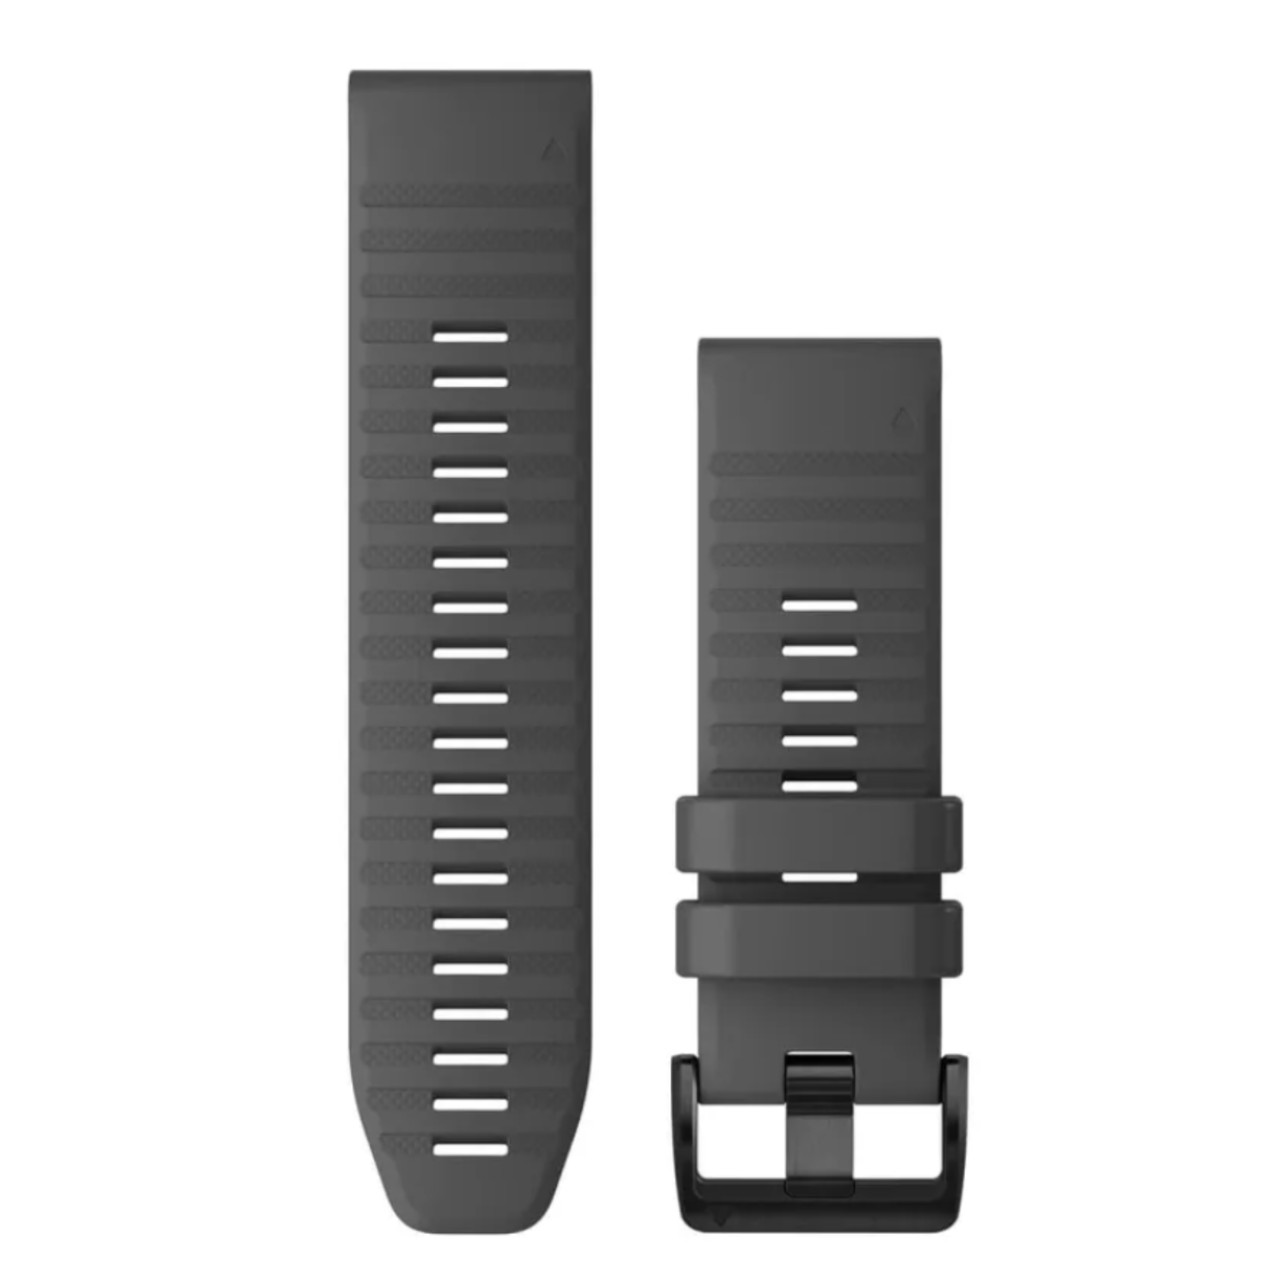 Garmin New OEM QuickFit® 26 Watch Bands Slate Gray Silicone, 010-12864-20